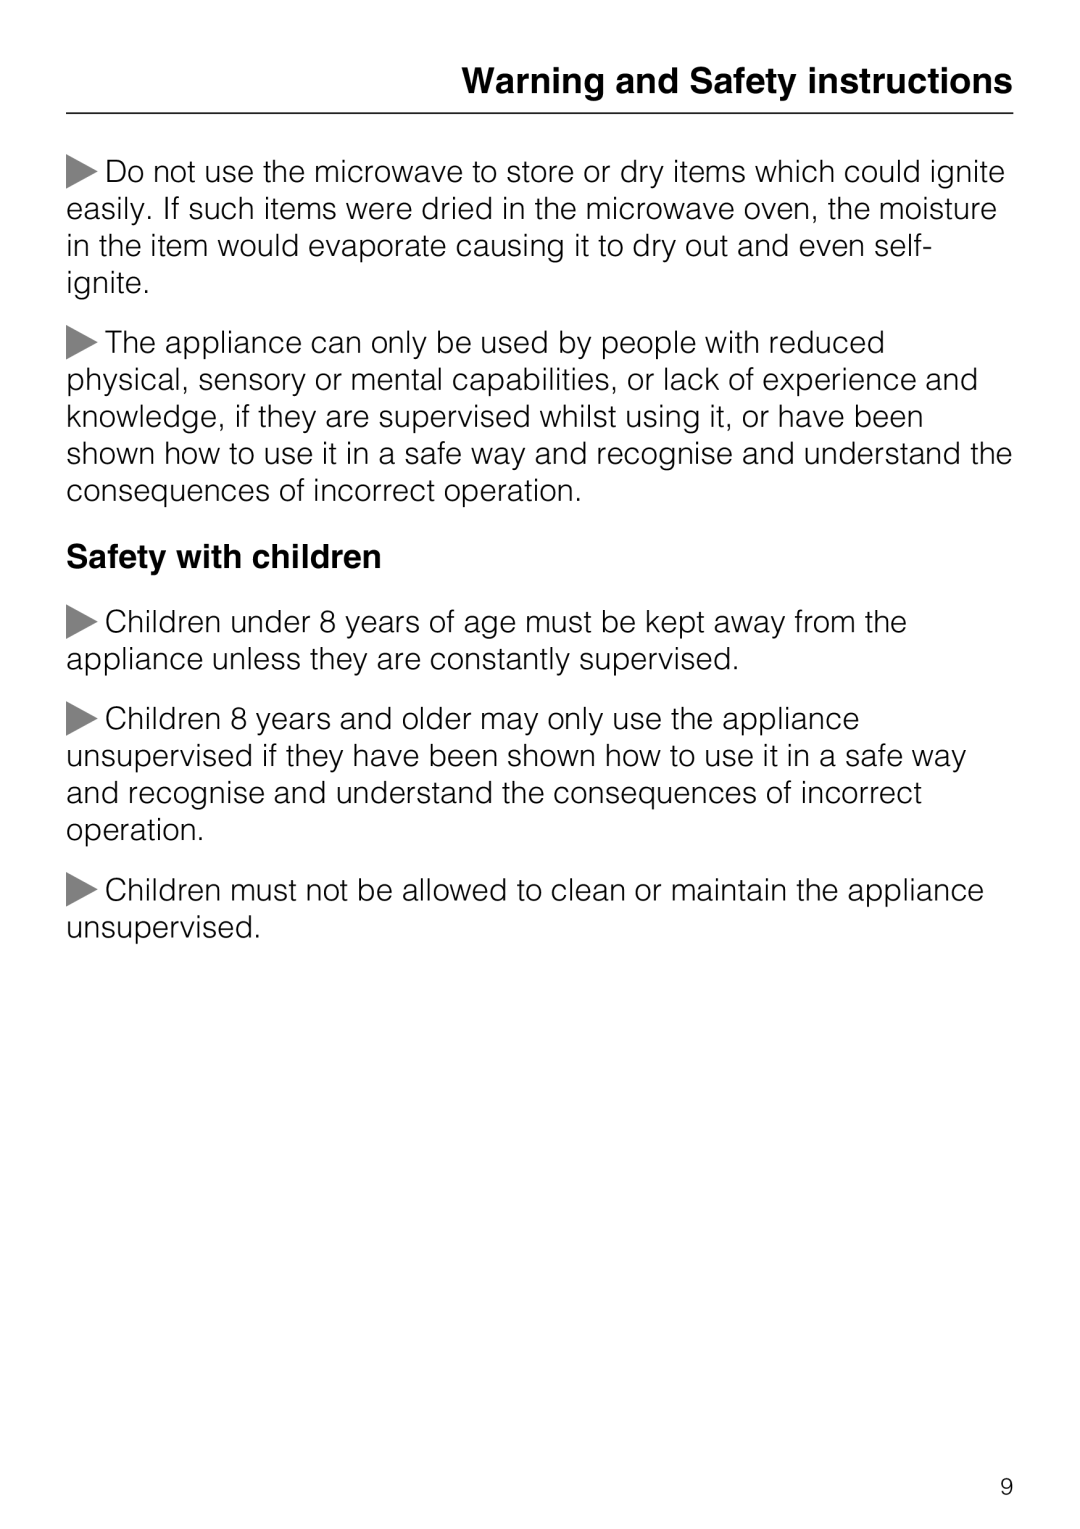 Miele 09 919 100 operating instructions Safety with children, Warning and Safety instructions 